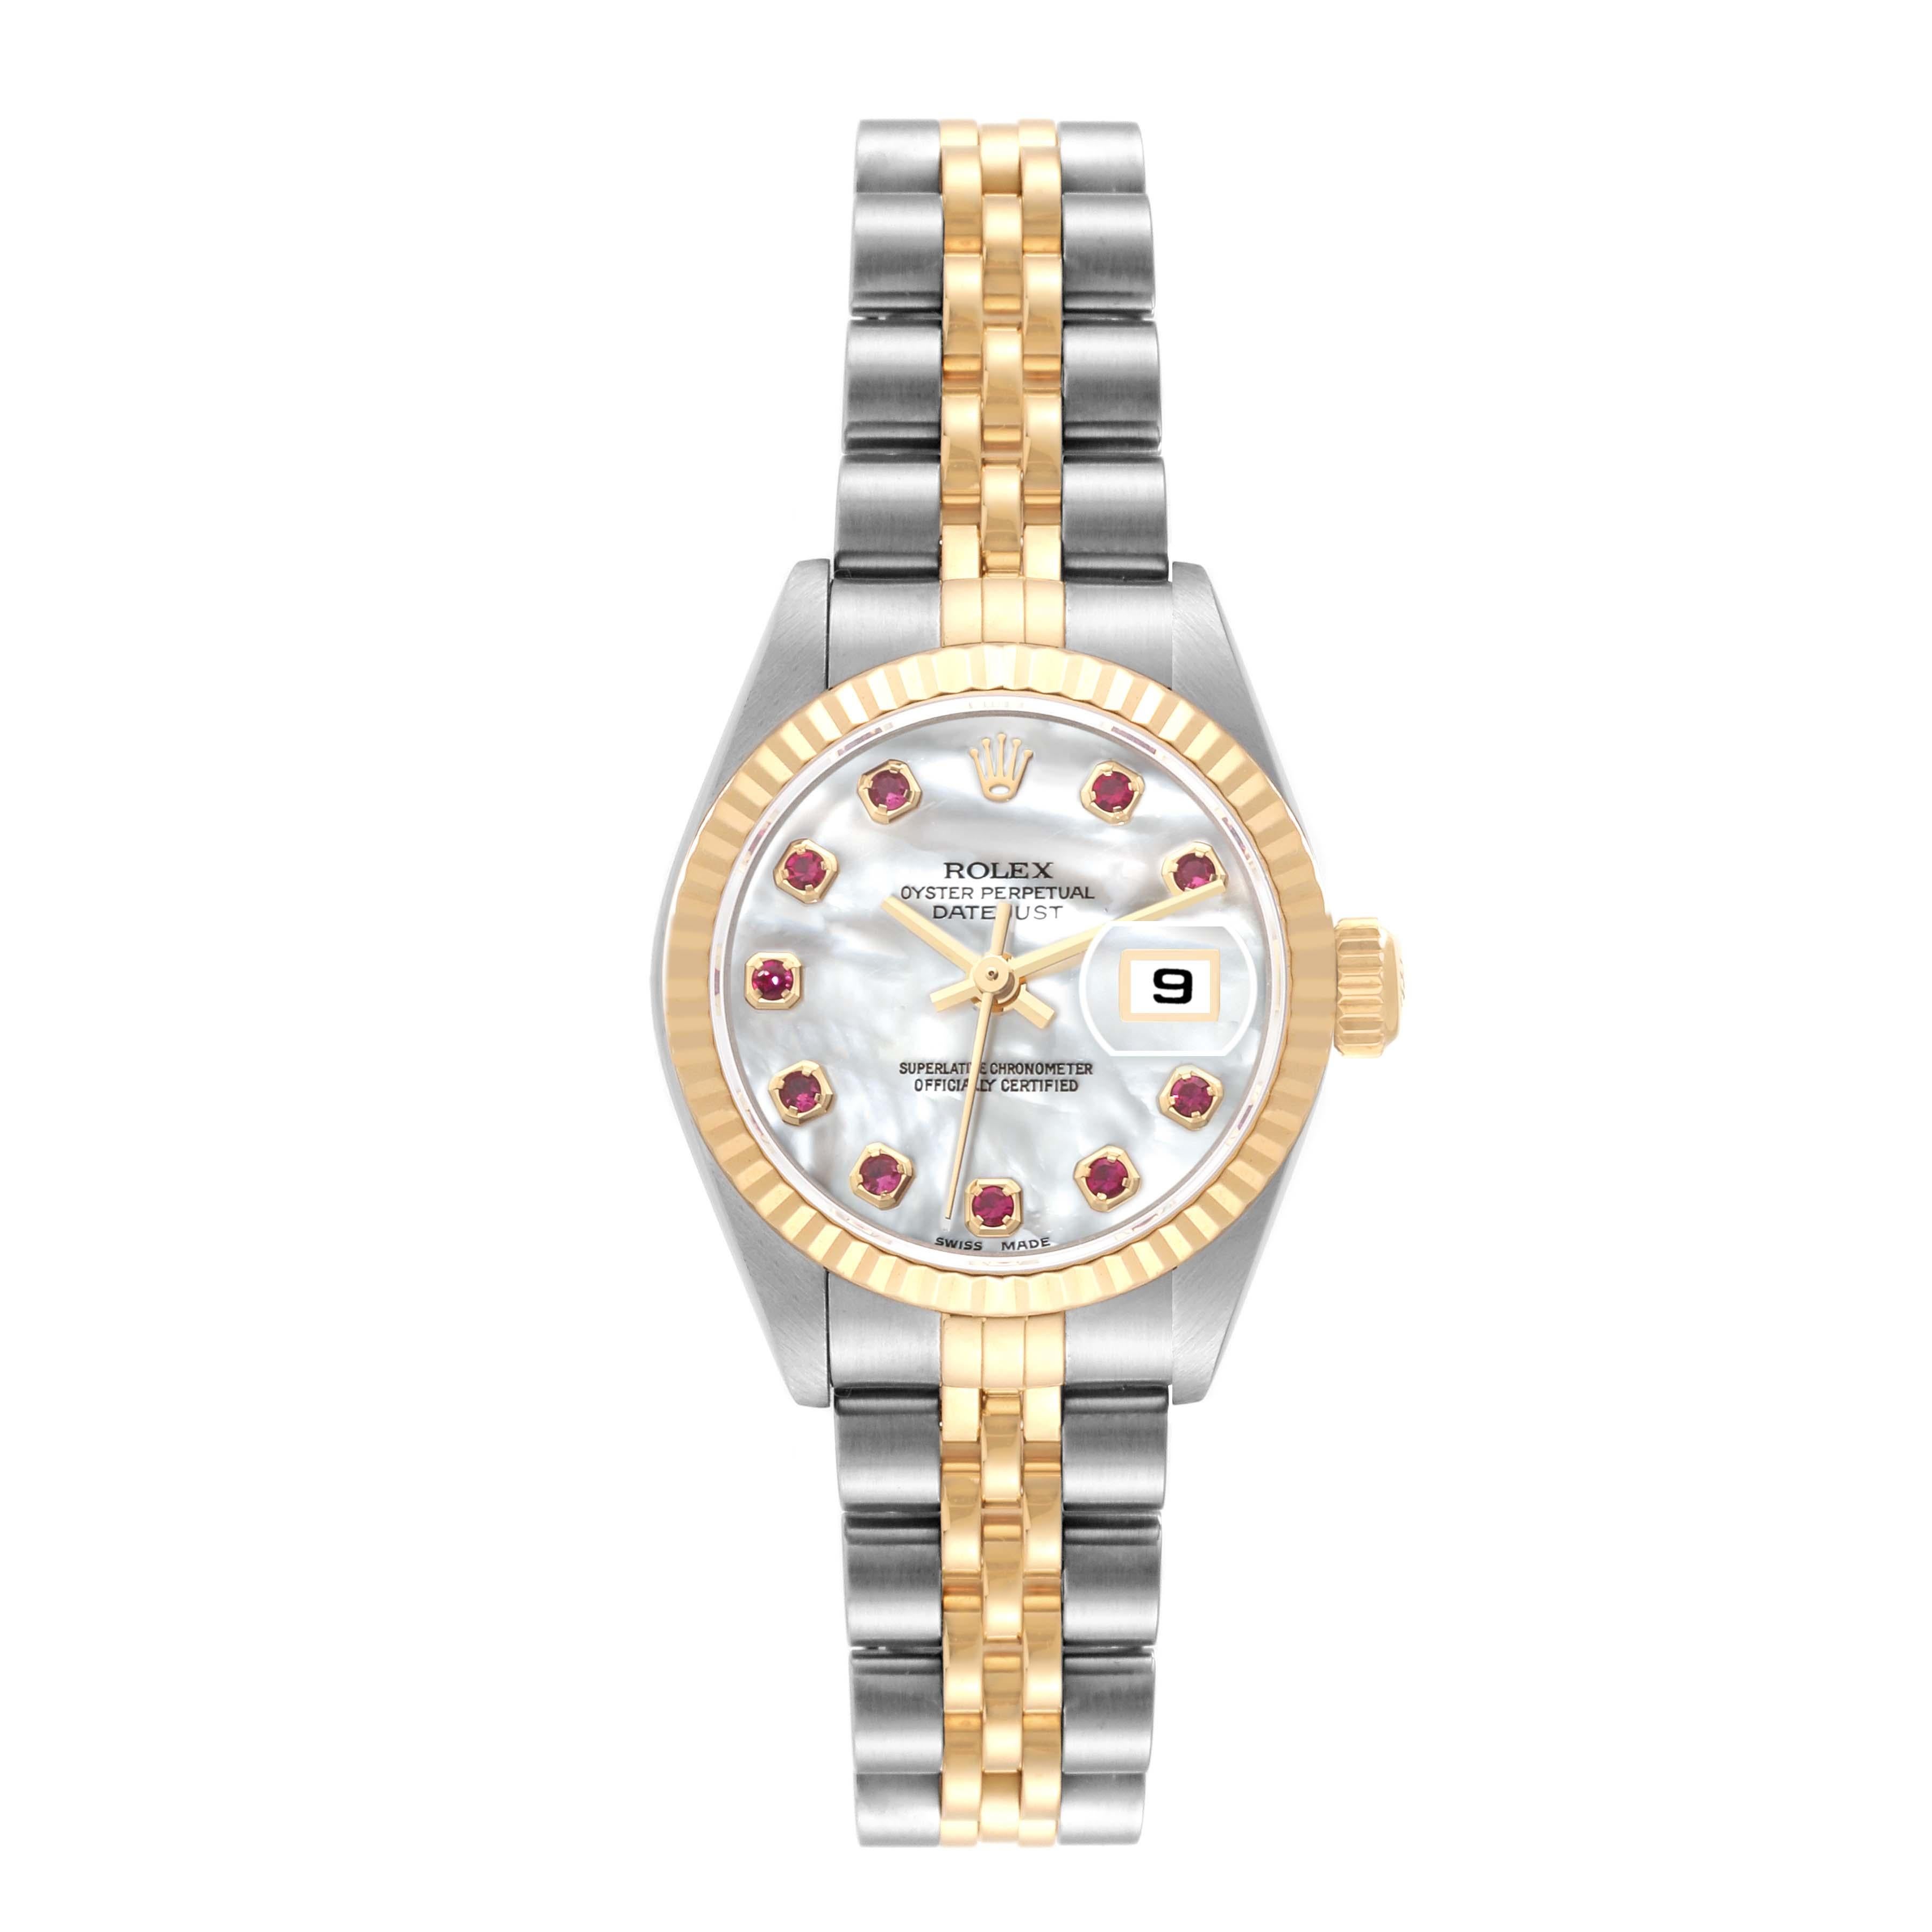 Rolex Datejust Steel Yellow Gold Mother Of Pearl Ruby Dial Ladies Watch 79173. Officially certified chronometer automatic self-winding movement. Stainless steel oyster case 26 mm in diameter. Rolex logo on an 18K yellow gold crown. 18k yellow gold